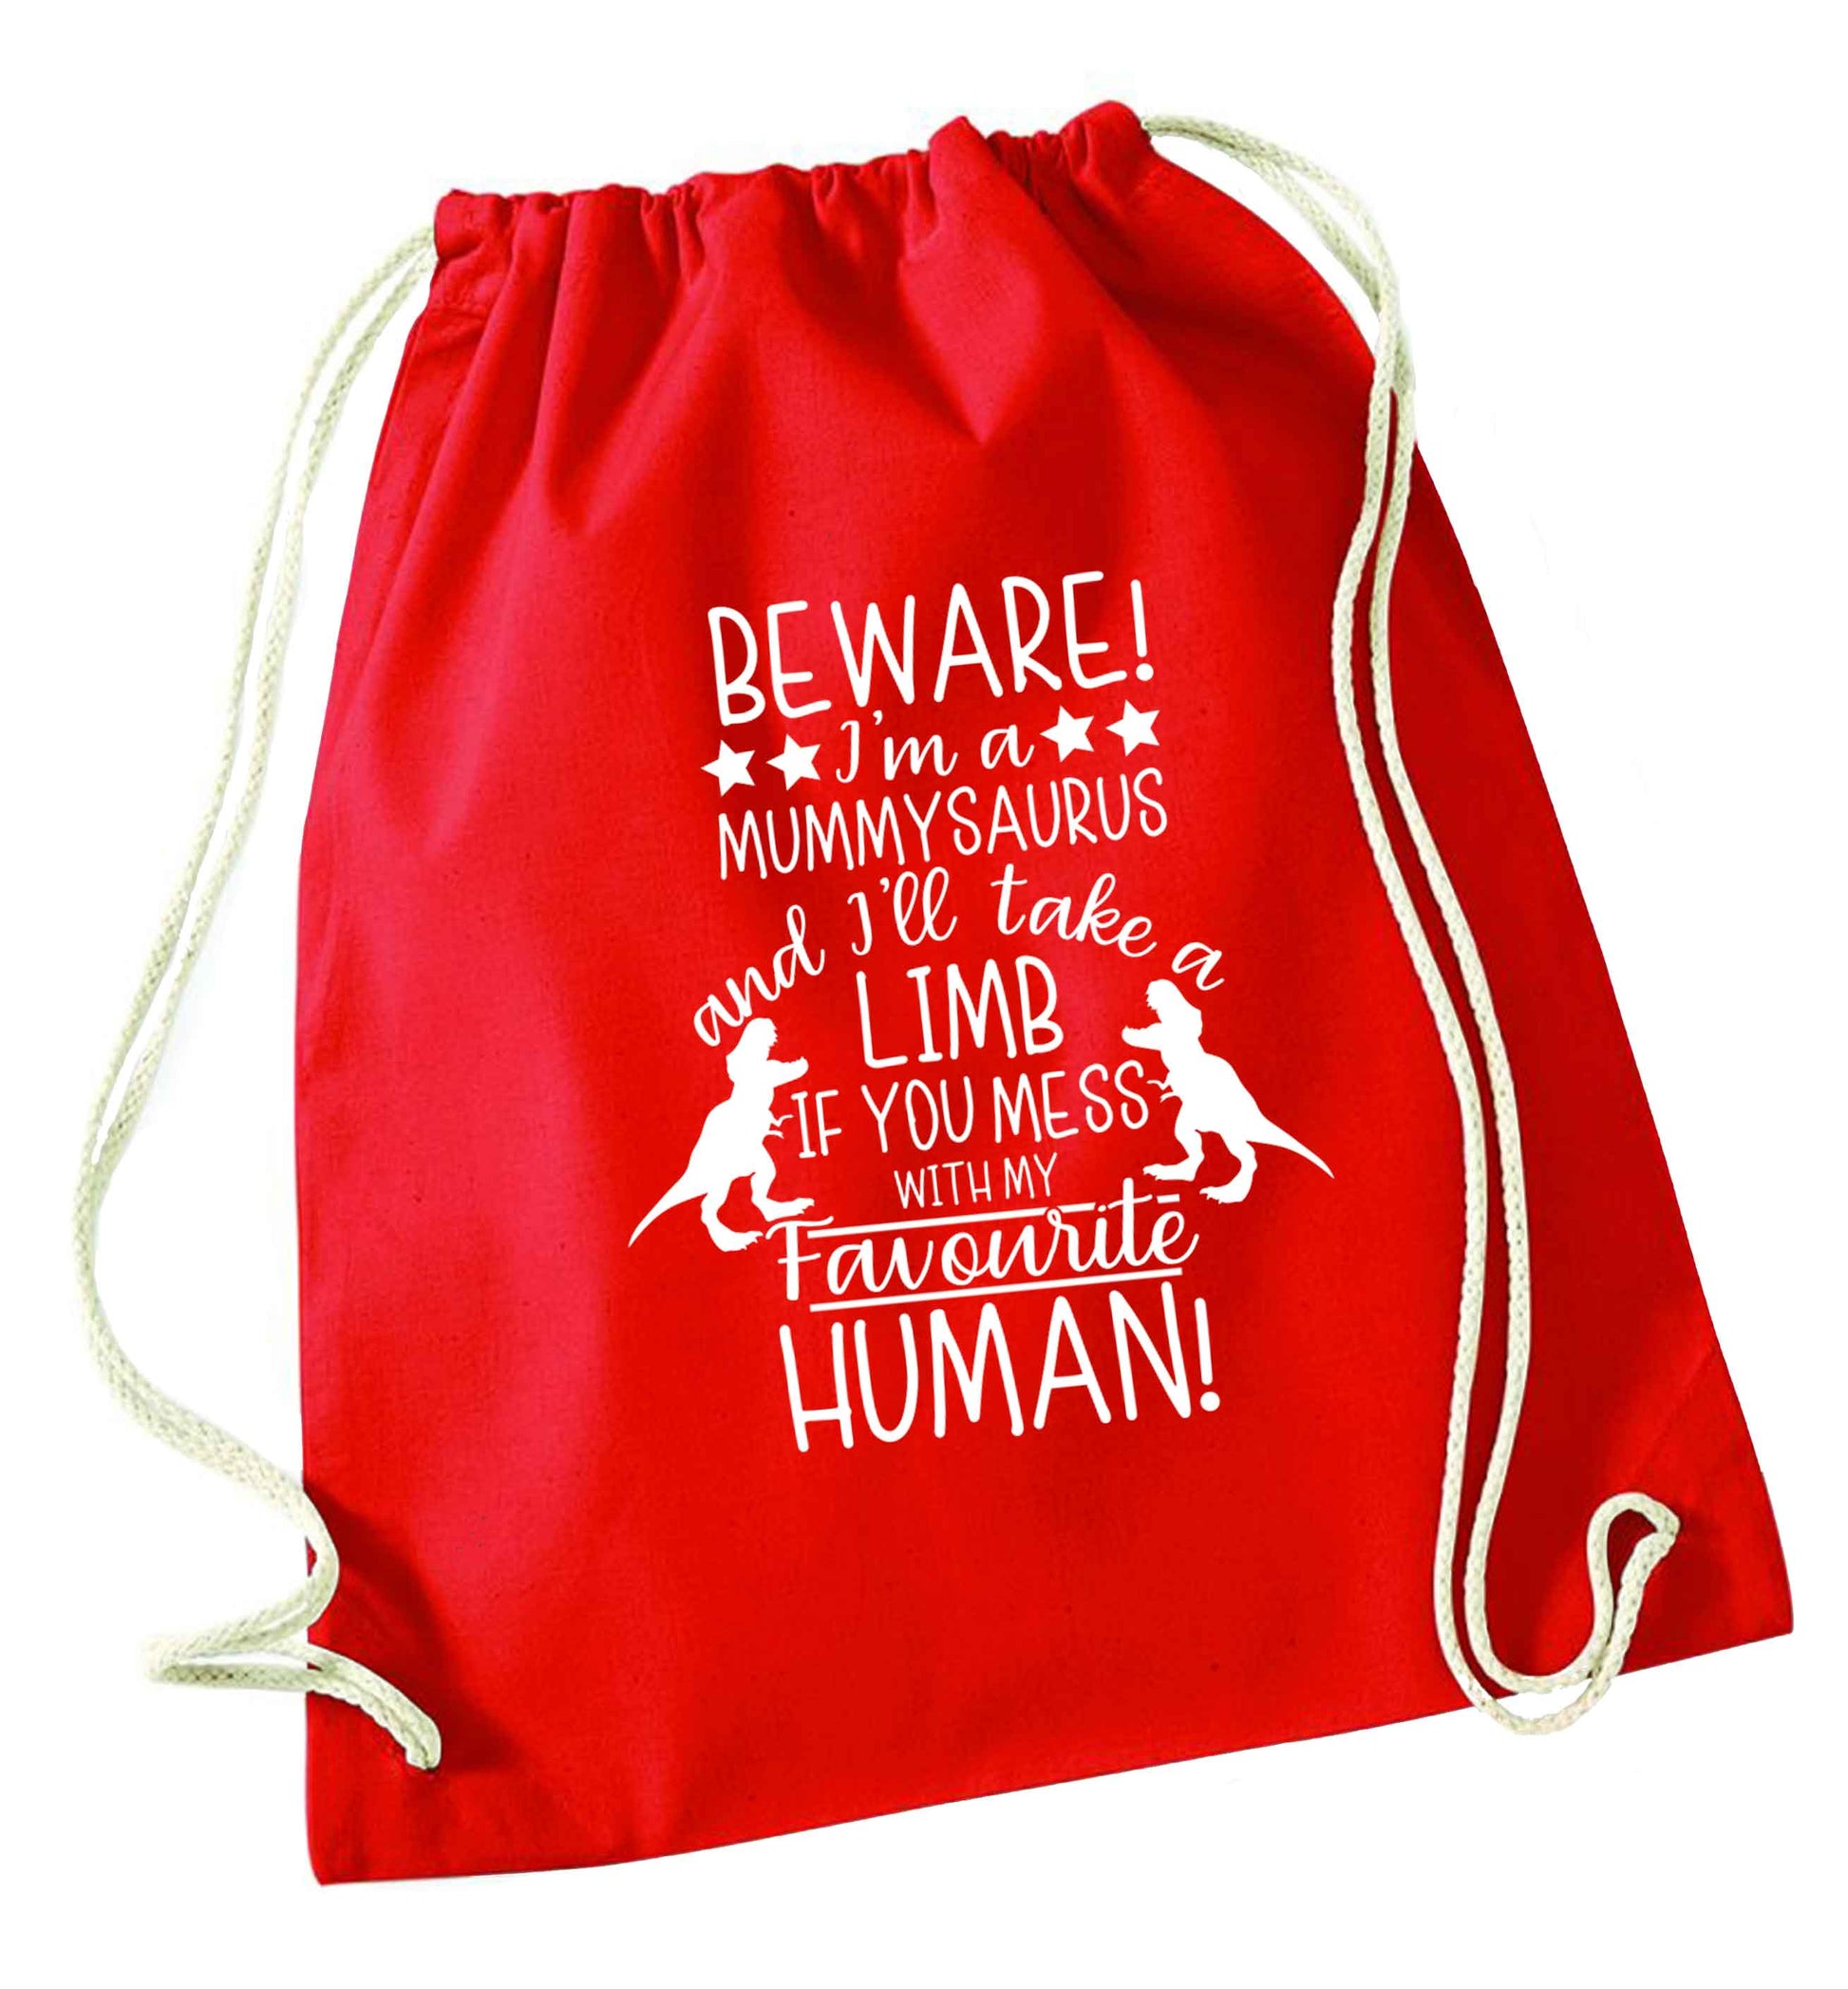 Perfect gift for any protective mummysaurus! Beware I'm a mummysaurus and I'll take a limb if you mess with my favourite human red drawstring bag 